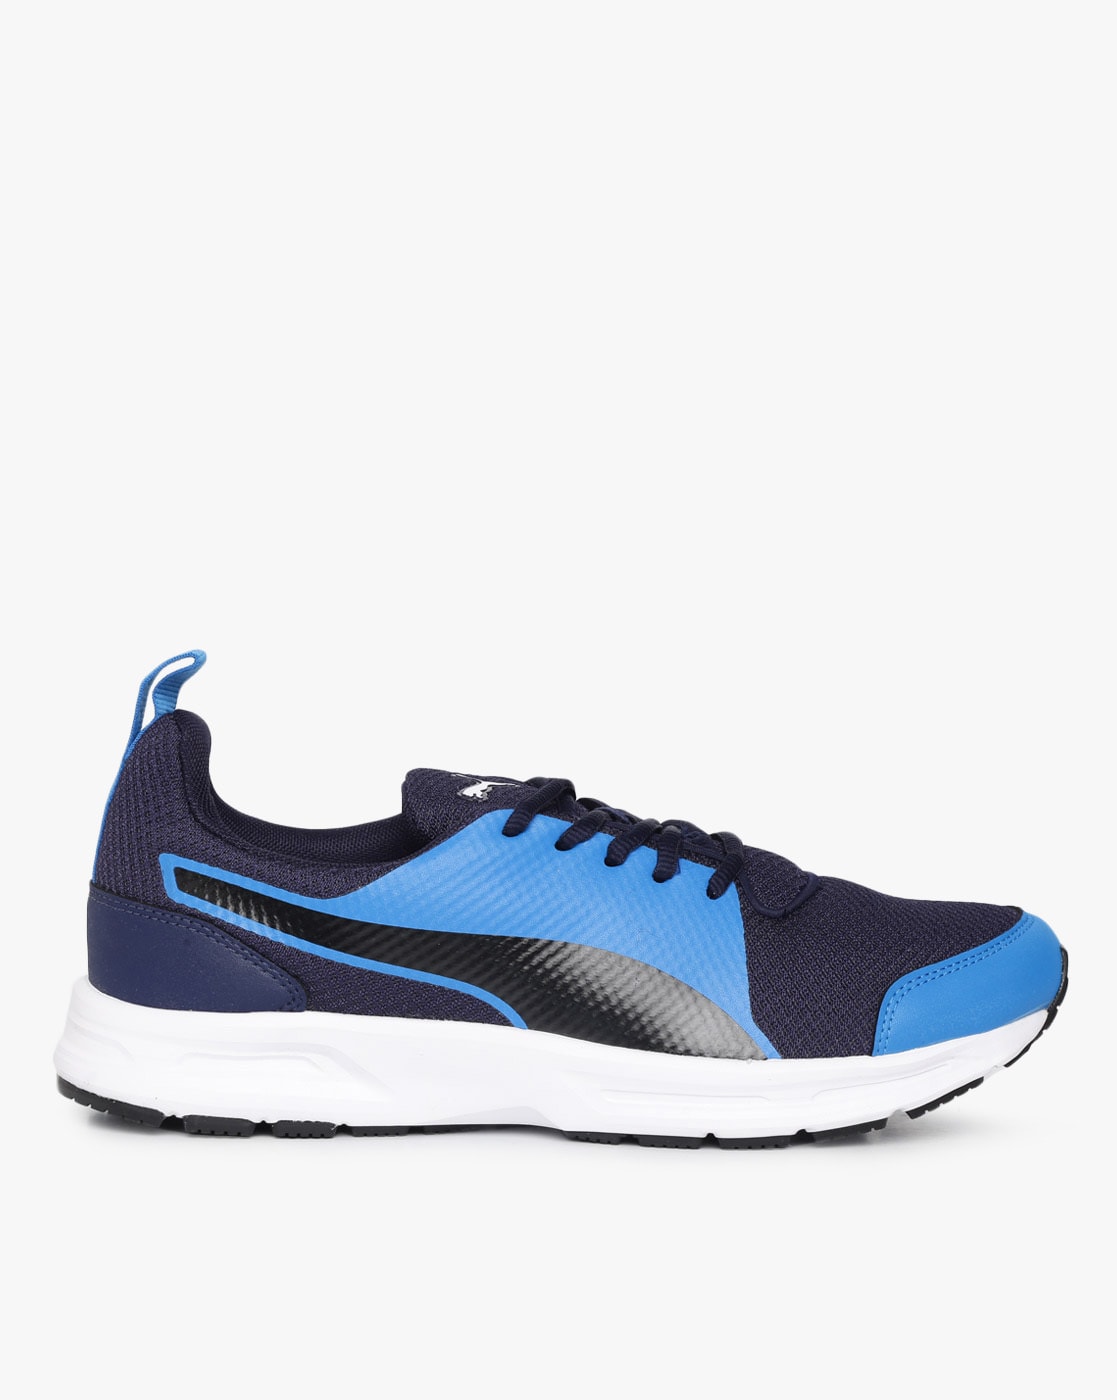 puma running shoes without laces